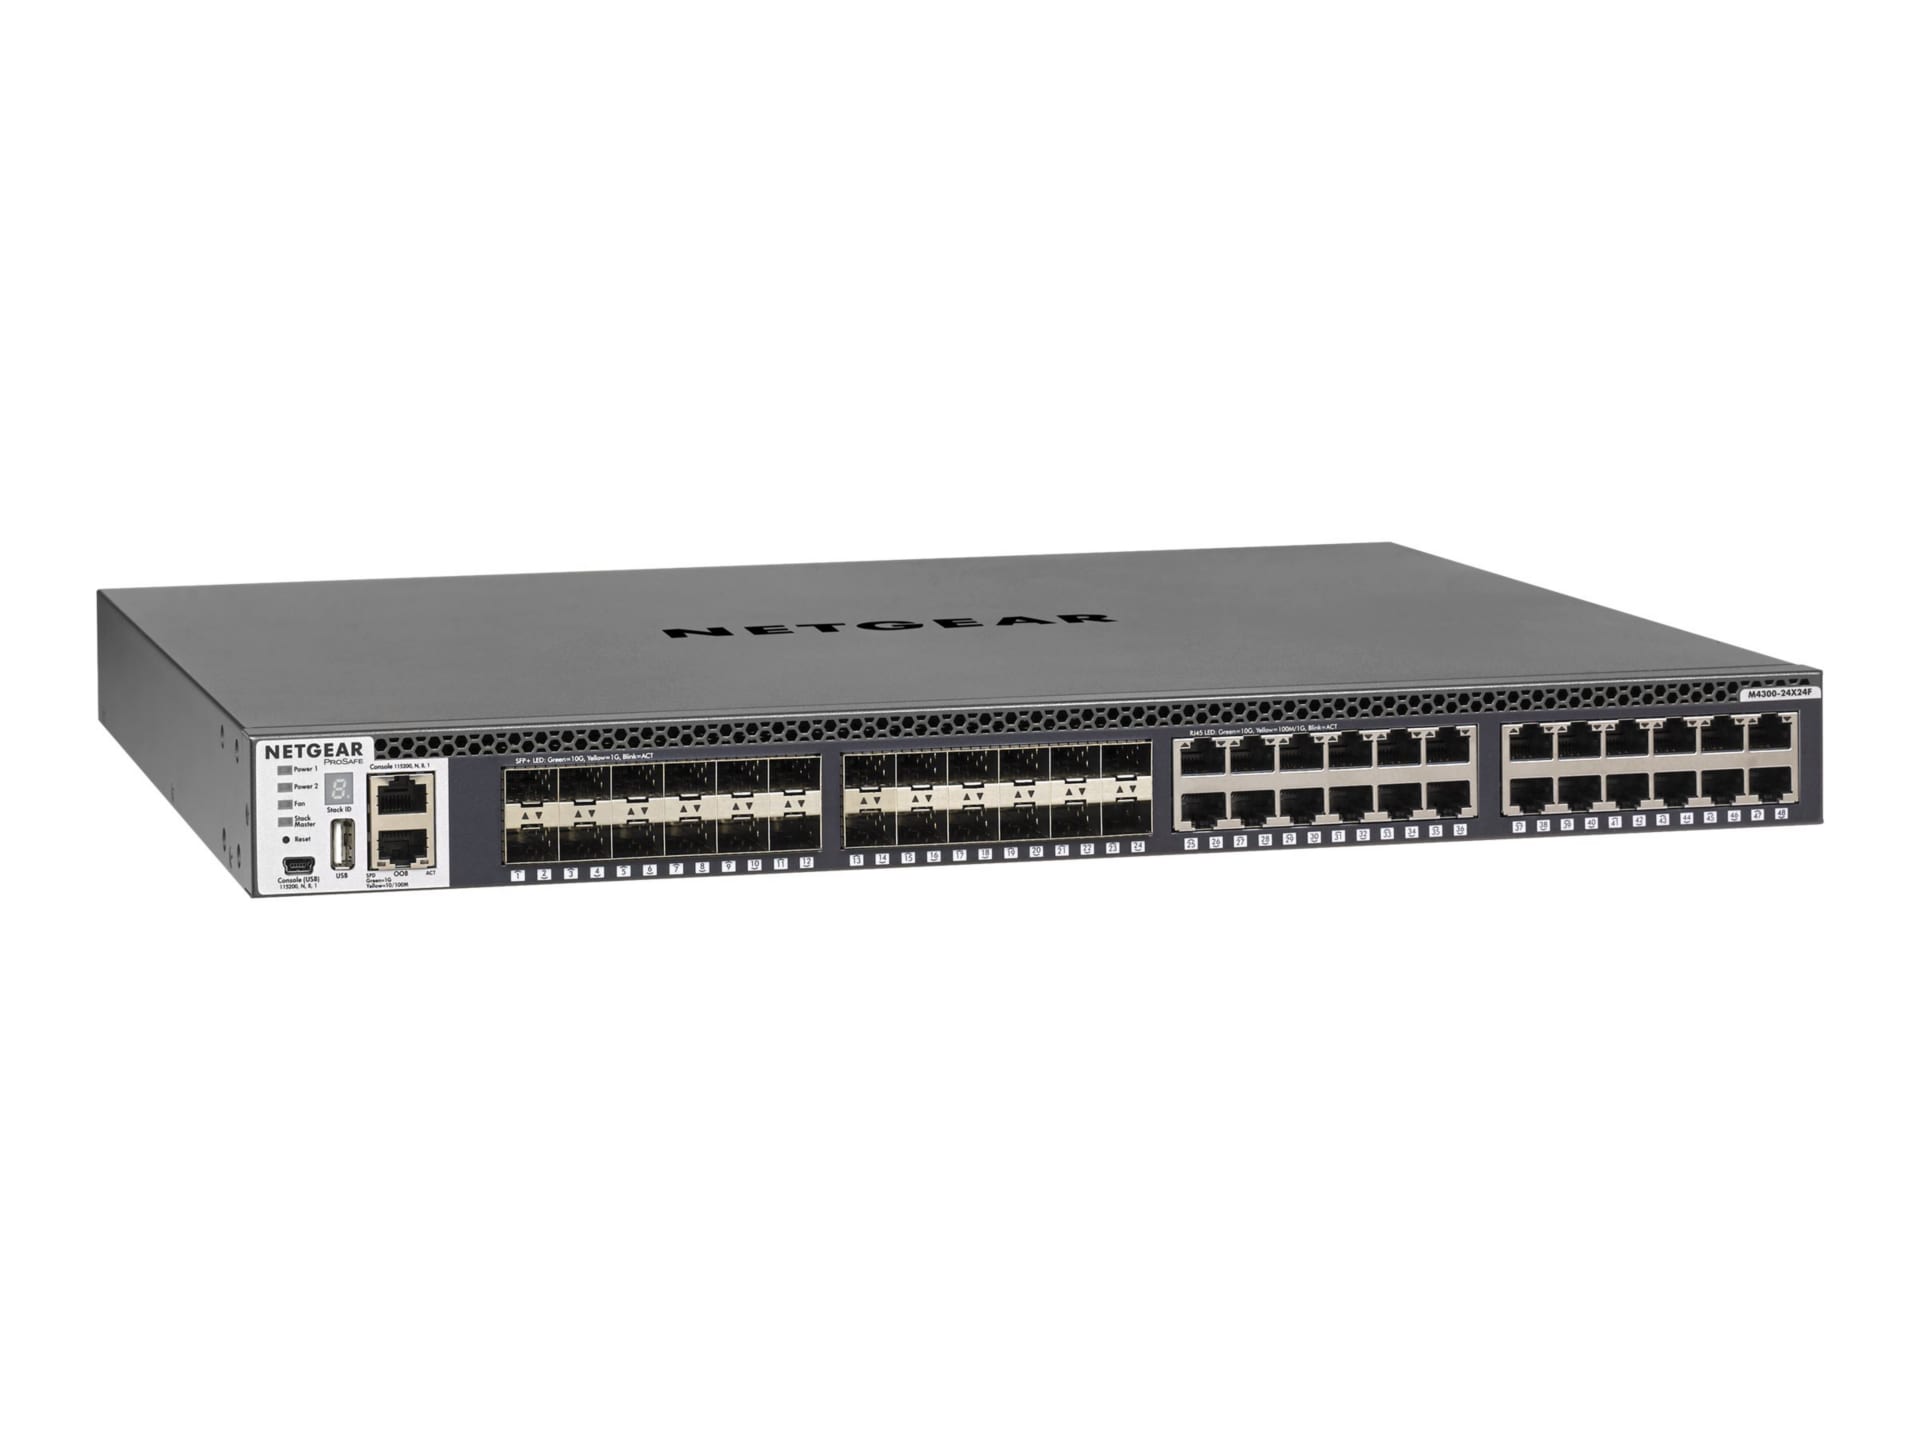 Netgear M4300 Stackable Managed Switch with 48x10G including 24x10GBASE-T a